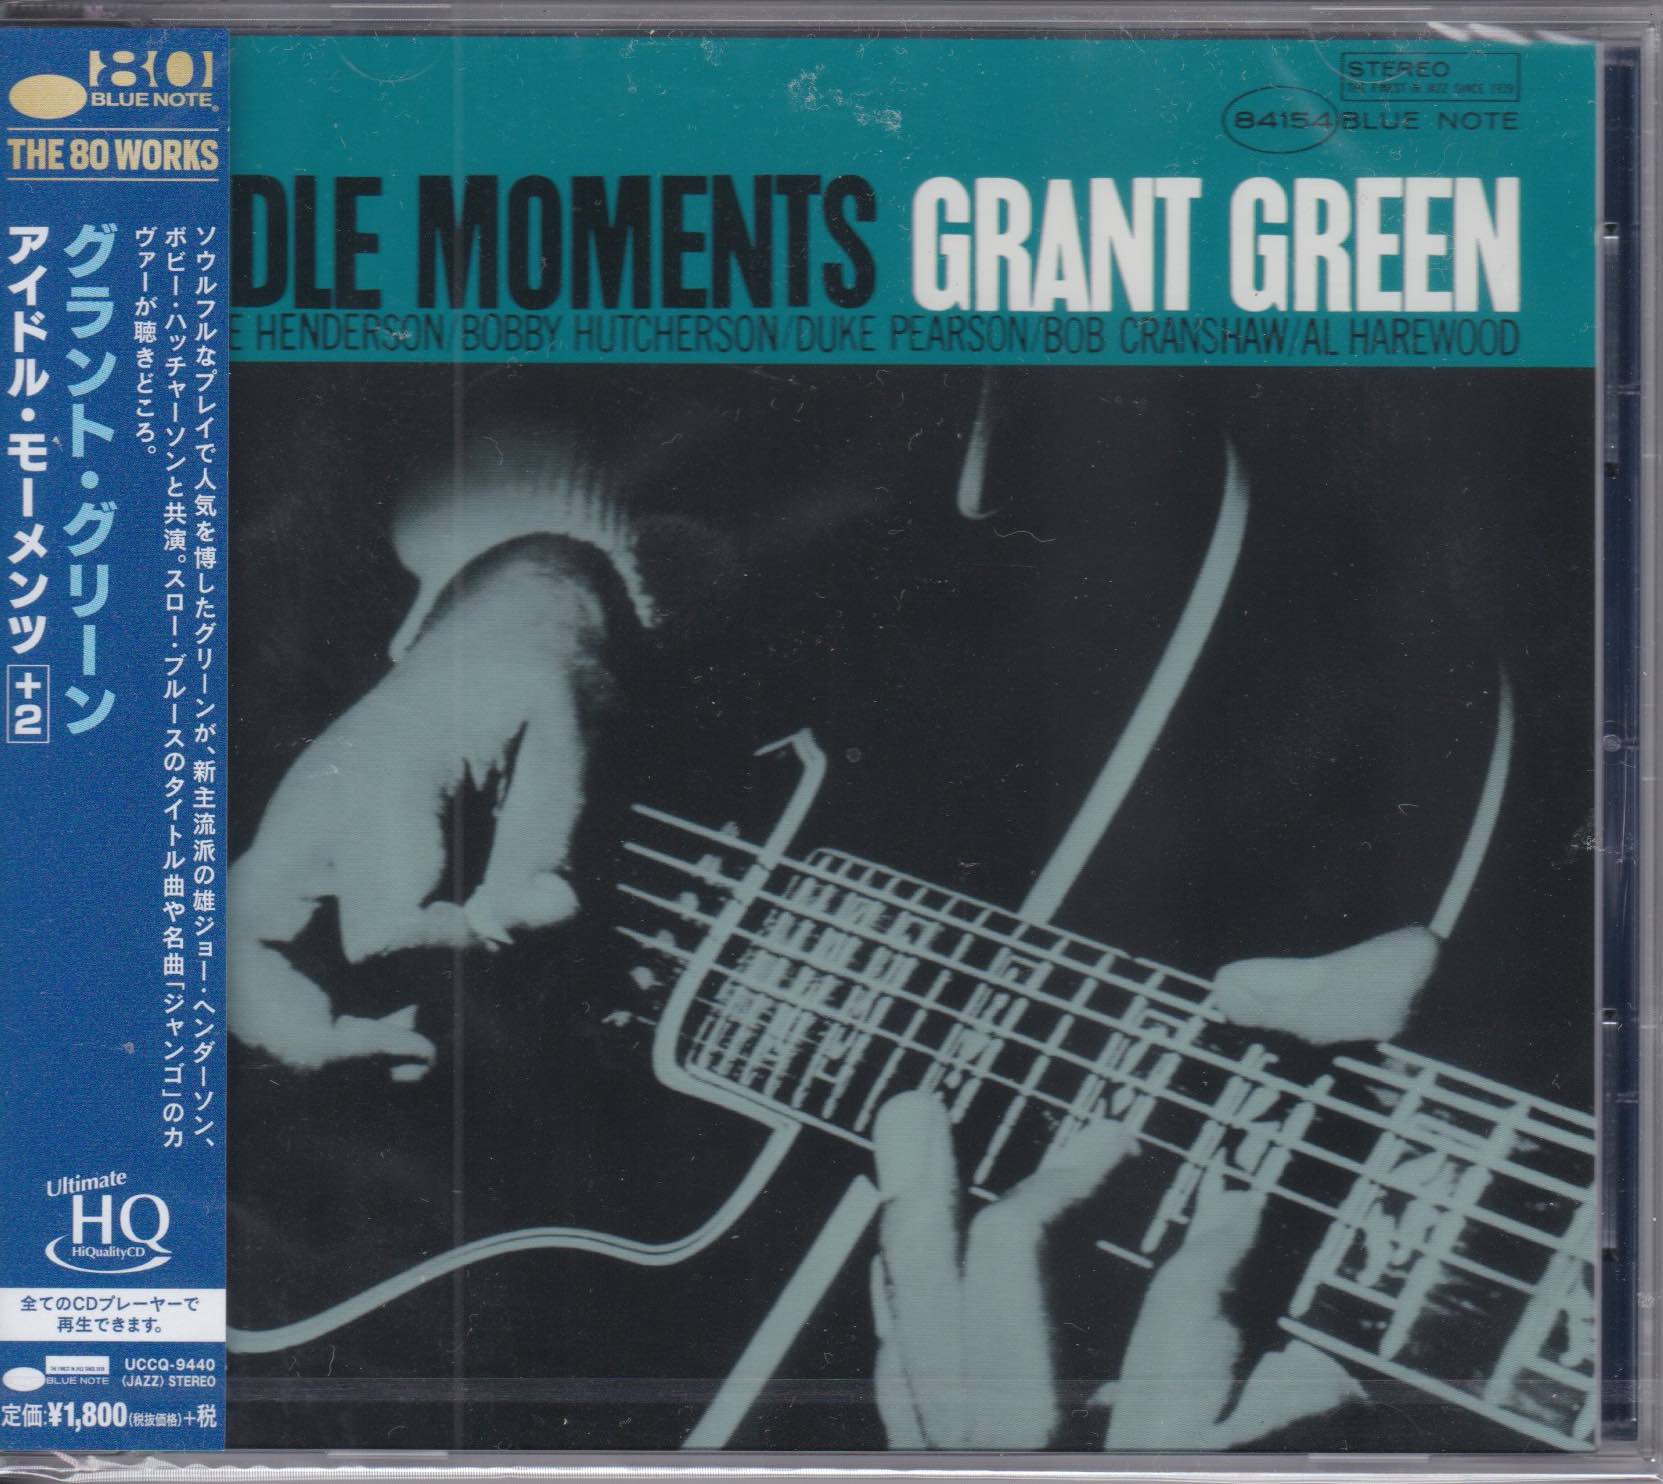 Grant Green ‎– Idle Moments